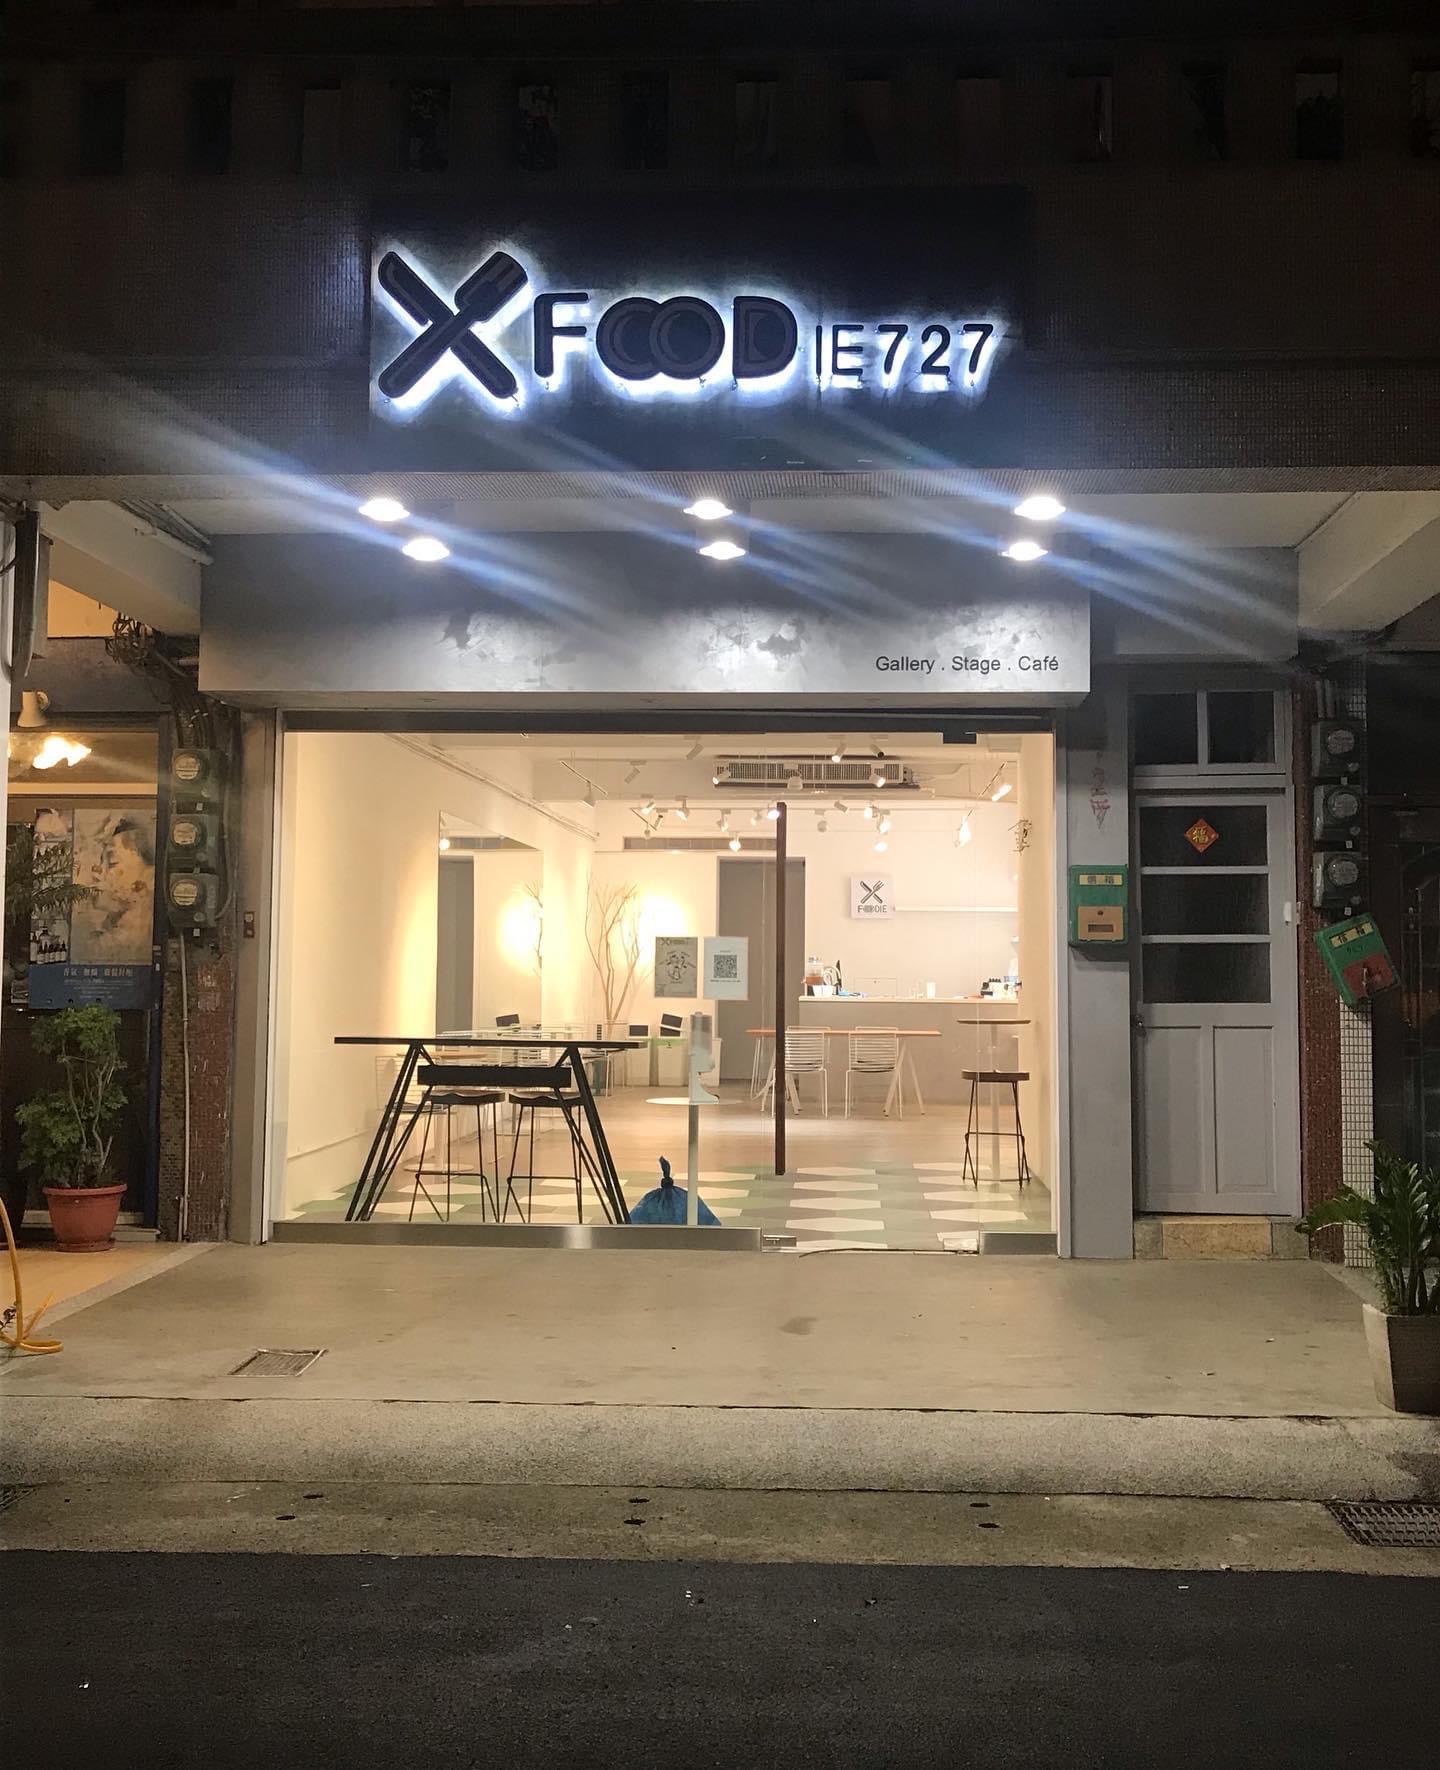 XFoodie 727新北投店 - 小豚